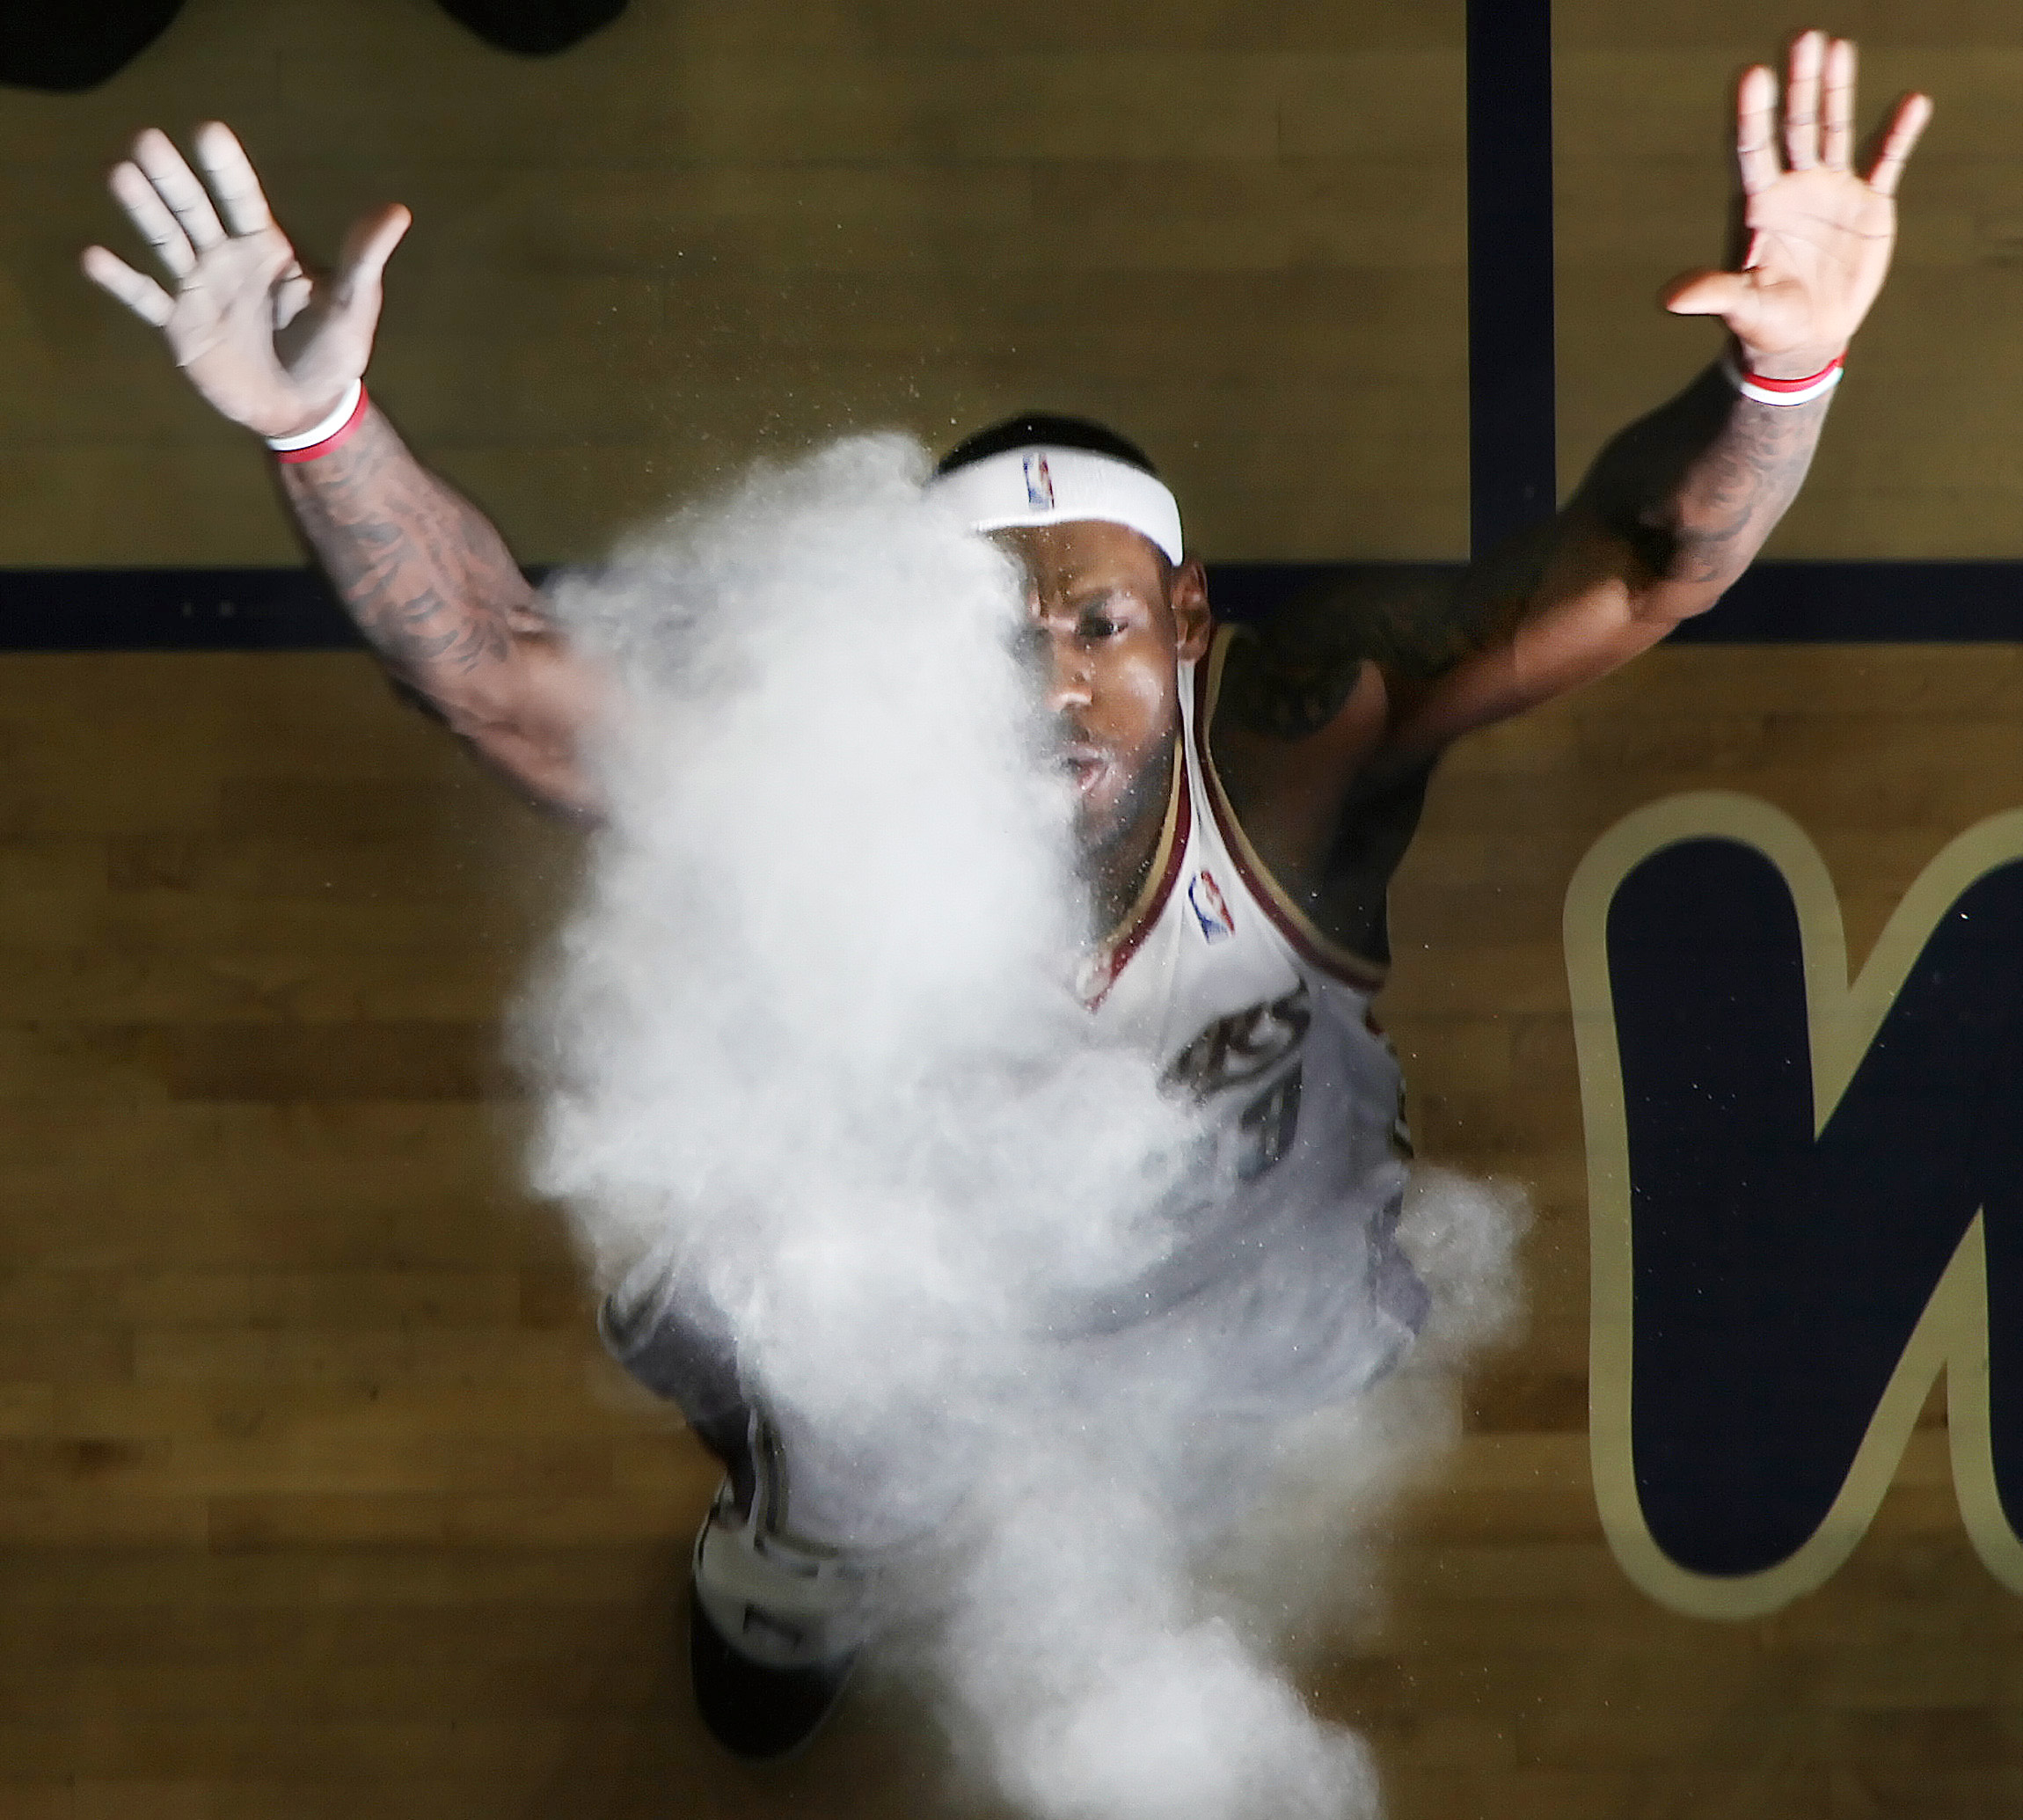 Cleveland Cavaliers LeBron James performs his pregame ritual of throwing up a handful of talc powder and blowing up in the air May 20, 2009 during the first game of the Eastern Conference Finals against the Orlando Magic at Quicken Loans Arena.  (John Kuntz / The Plain Dealer) 